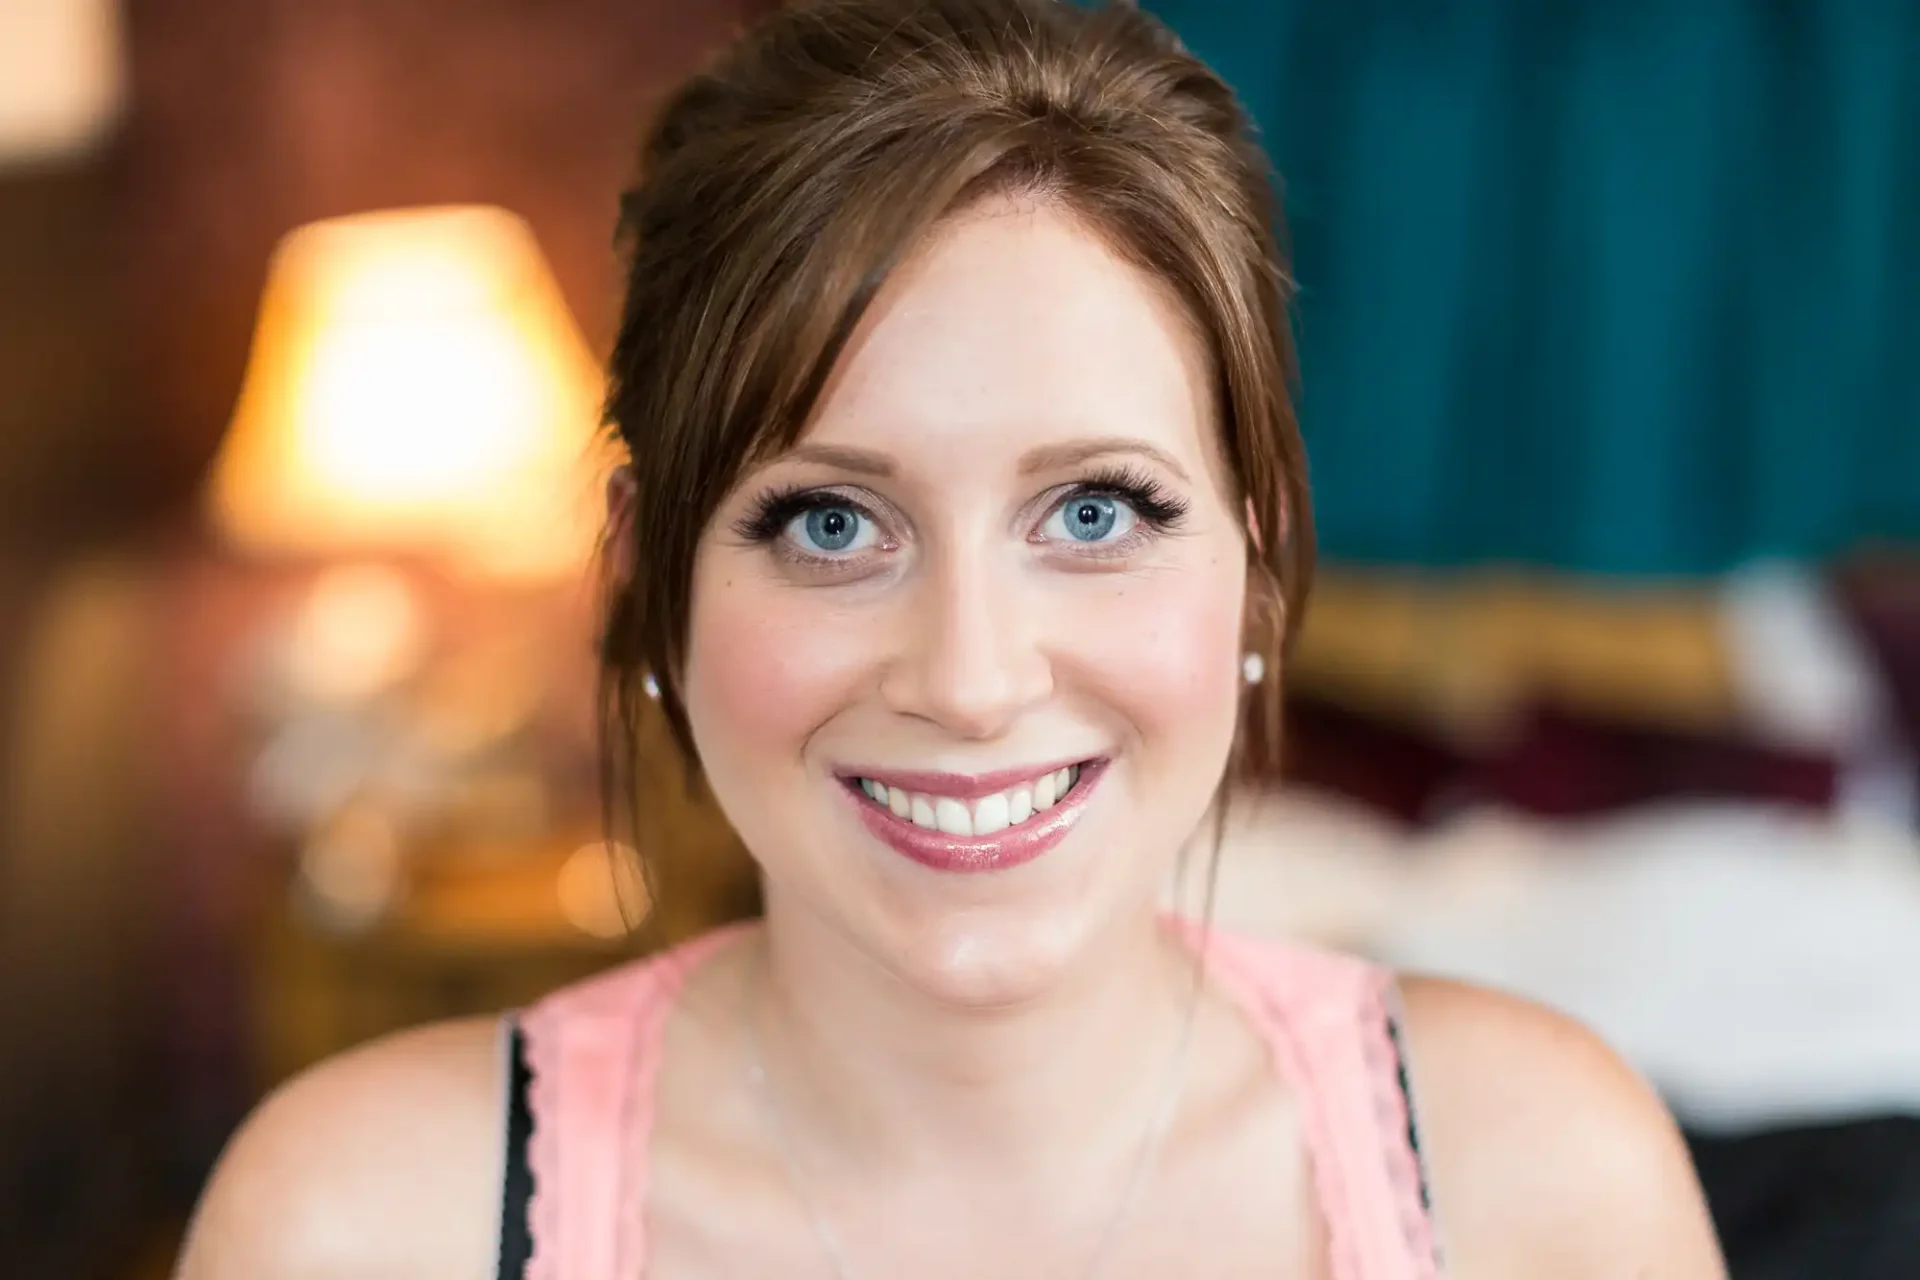 Close-up portrait of a smiling woman with blue eyes, wearing light makeup and a pink top, indoors with a softly blurred background.